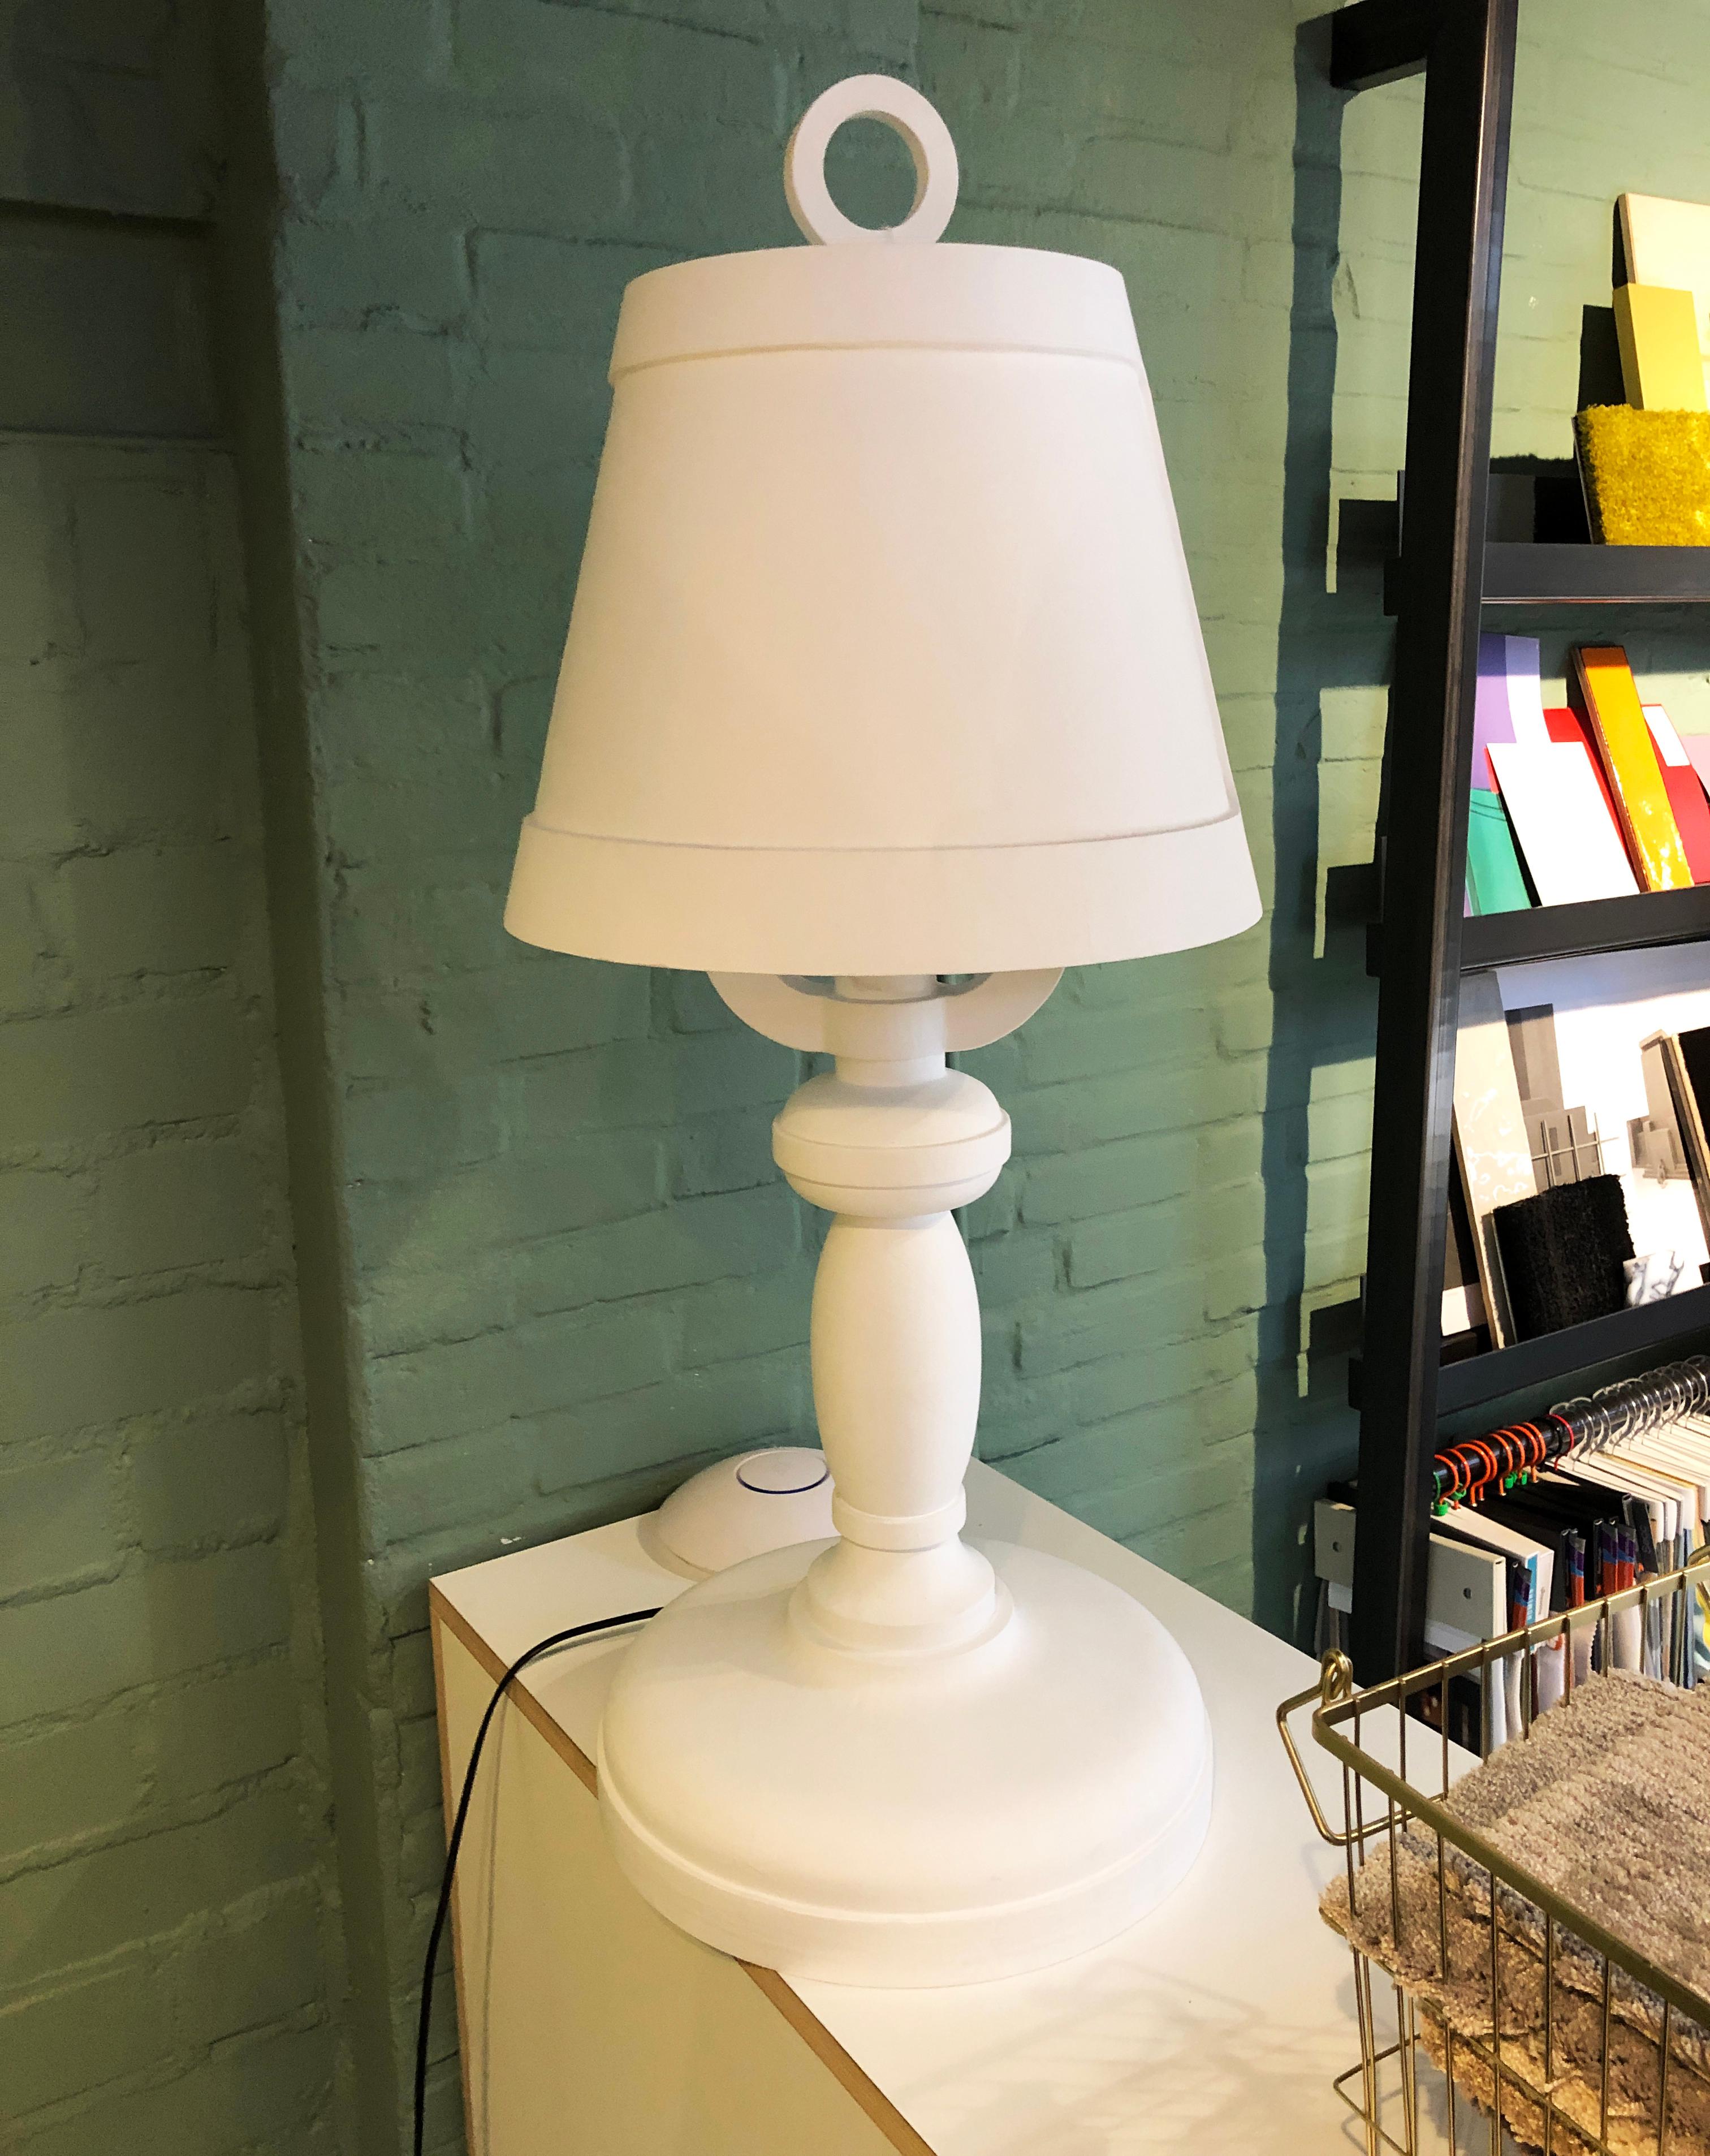 Dutch Paper Table Lamp in White Shade and White Base by Studio Job for Moooi